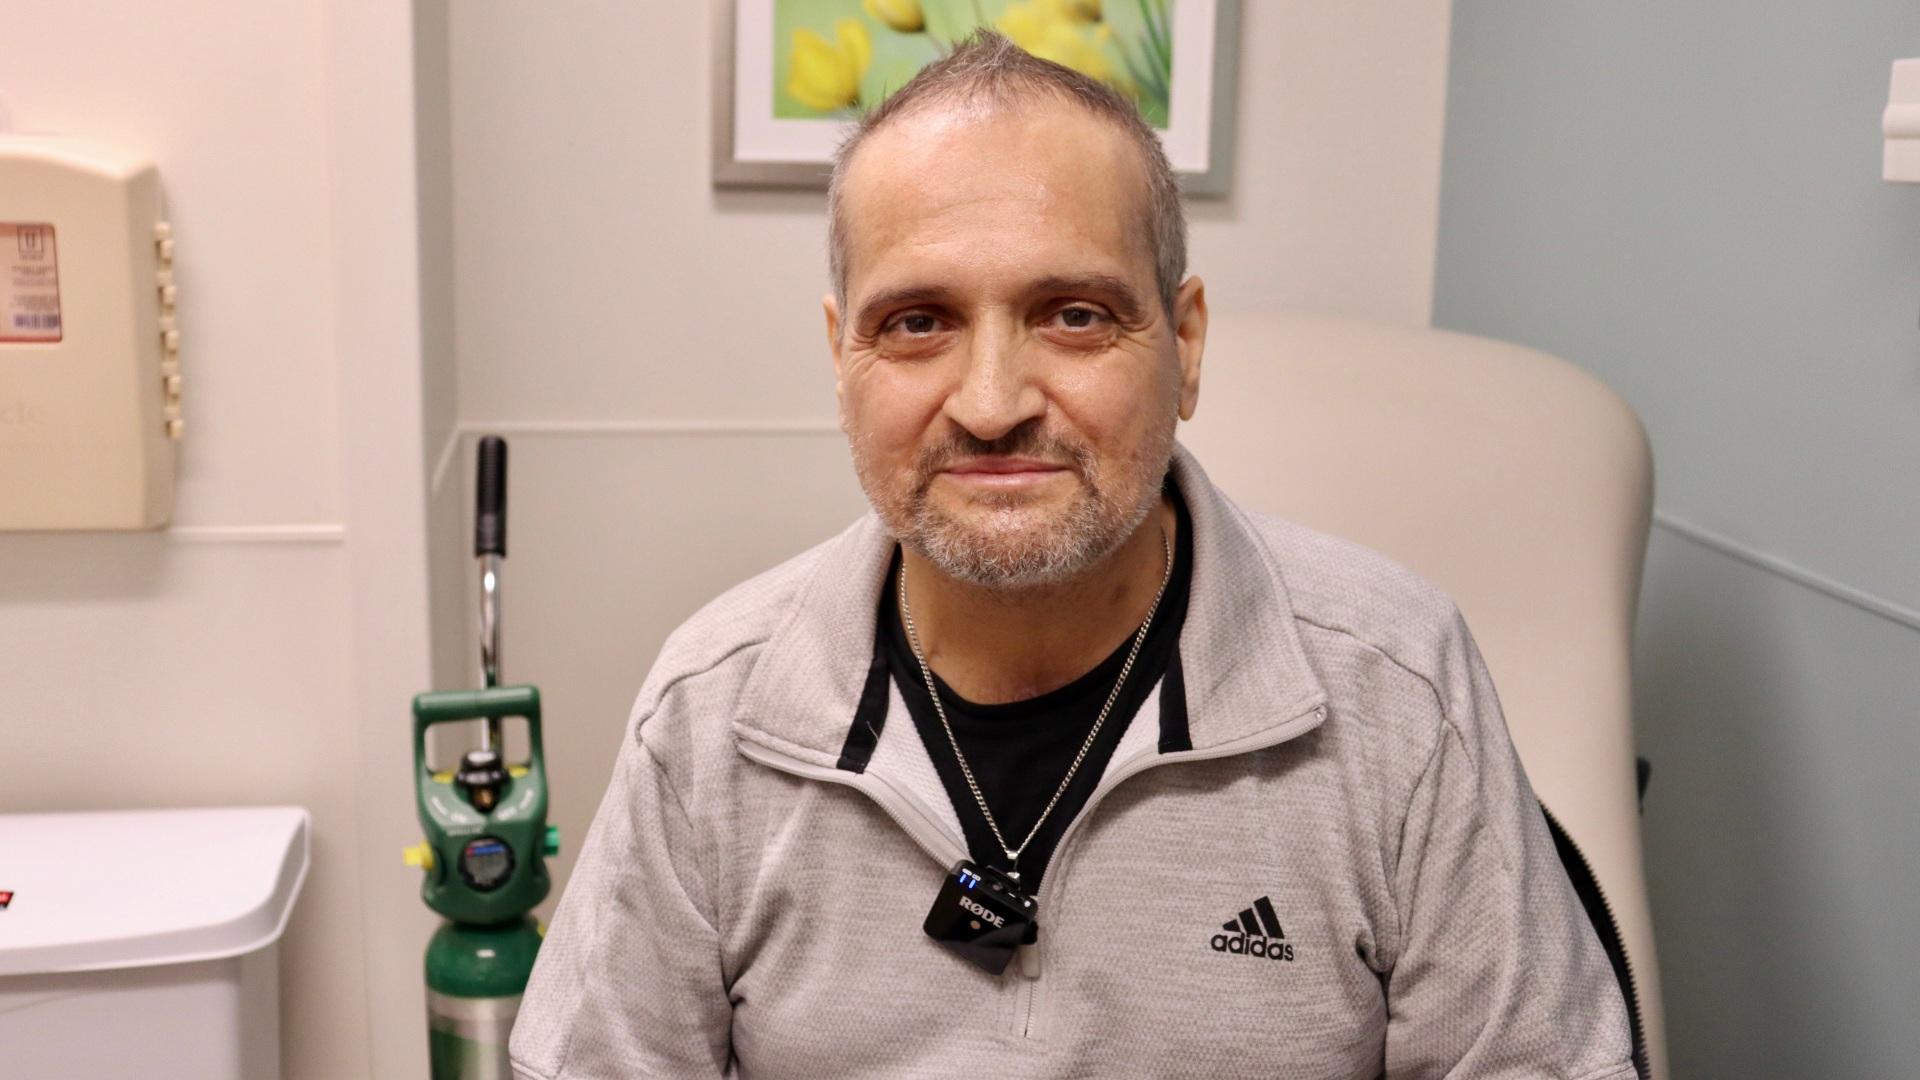 Chicagoan Albert Khoury, 54, underwent a double lung transplant Sept. 25, 2021 to treat stage 4 lung cancer. (Courtesy of Northwestern Medicine)